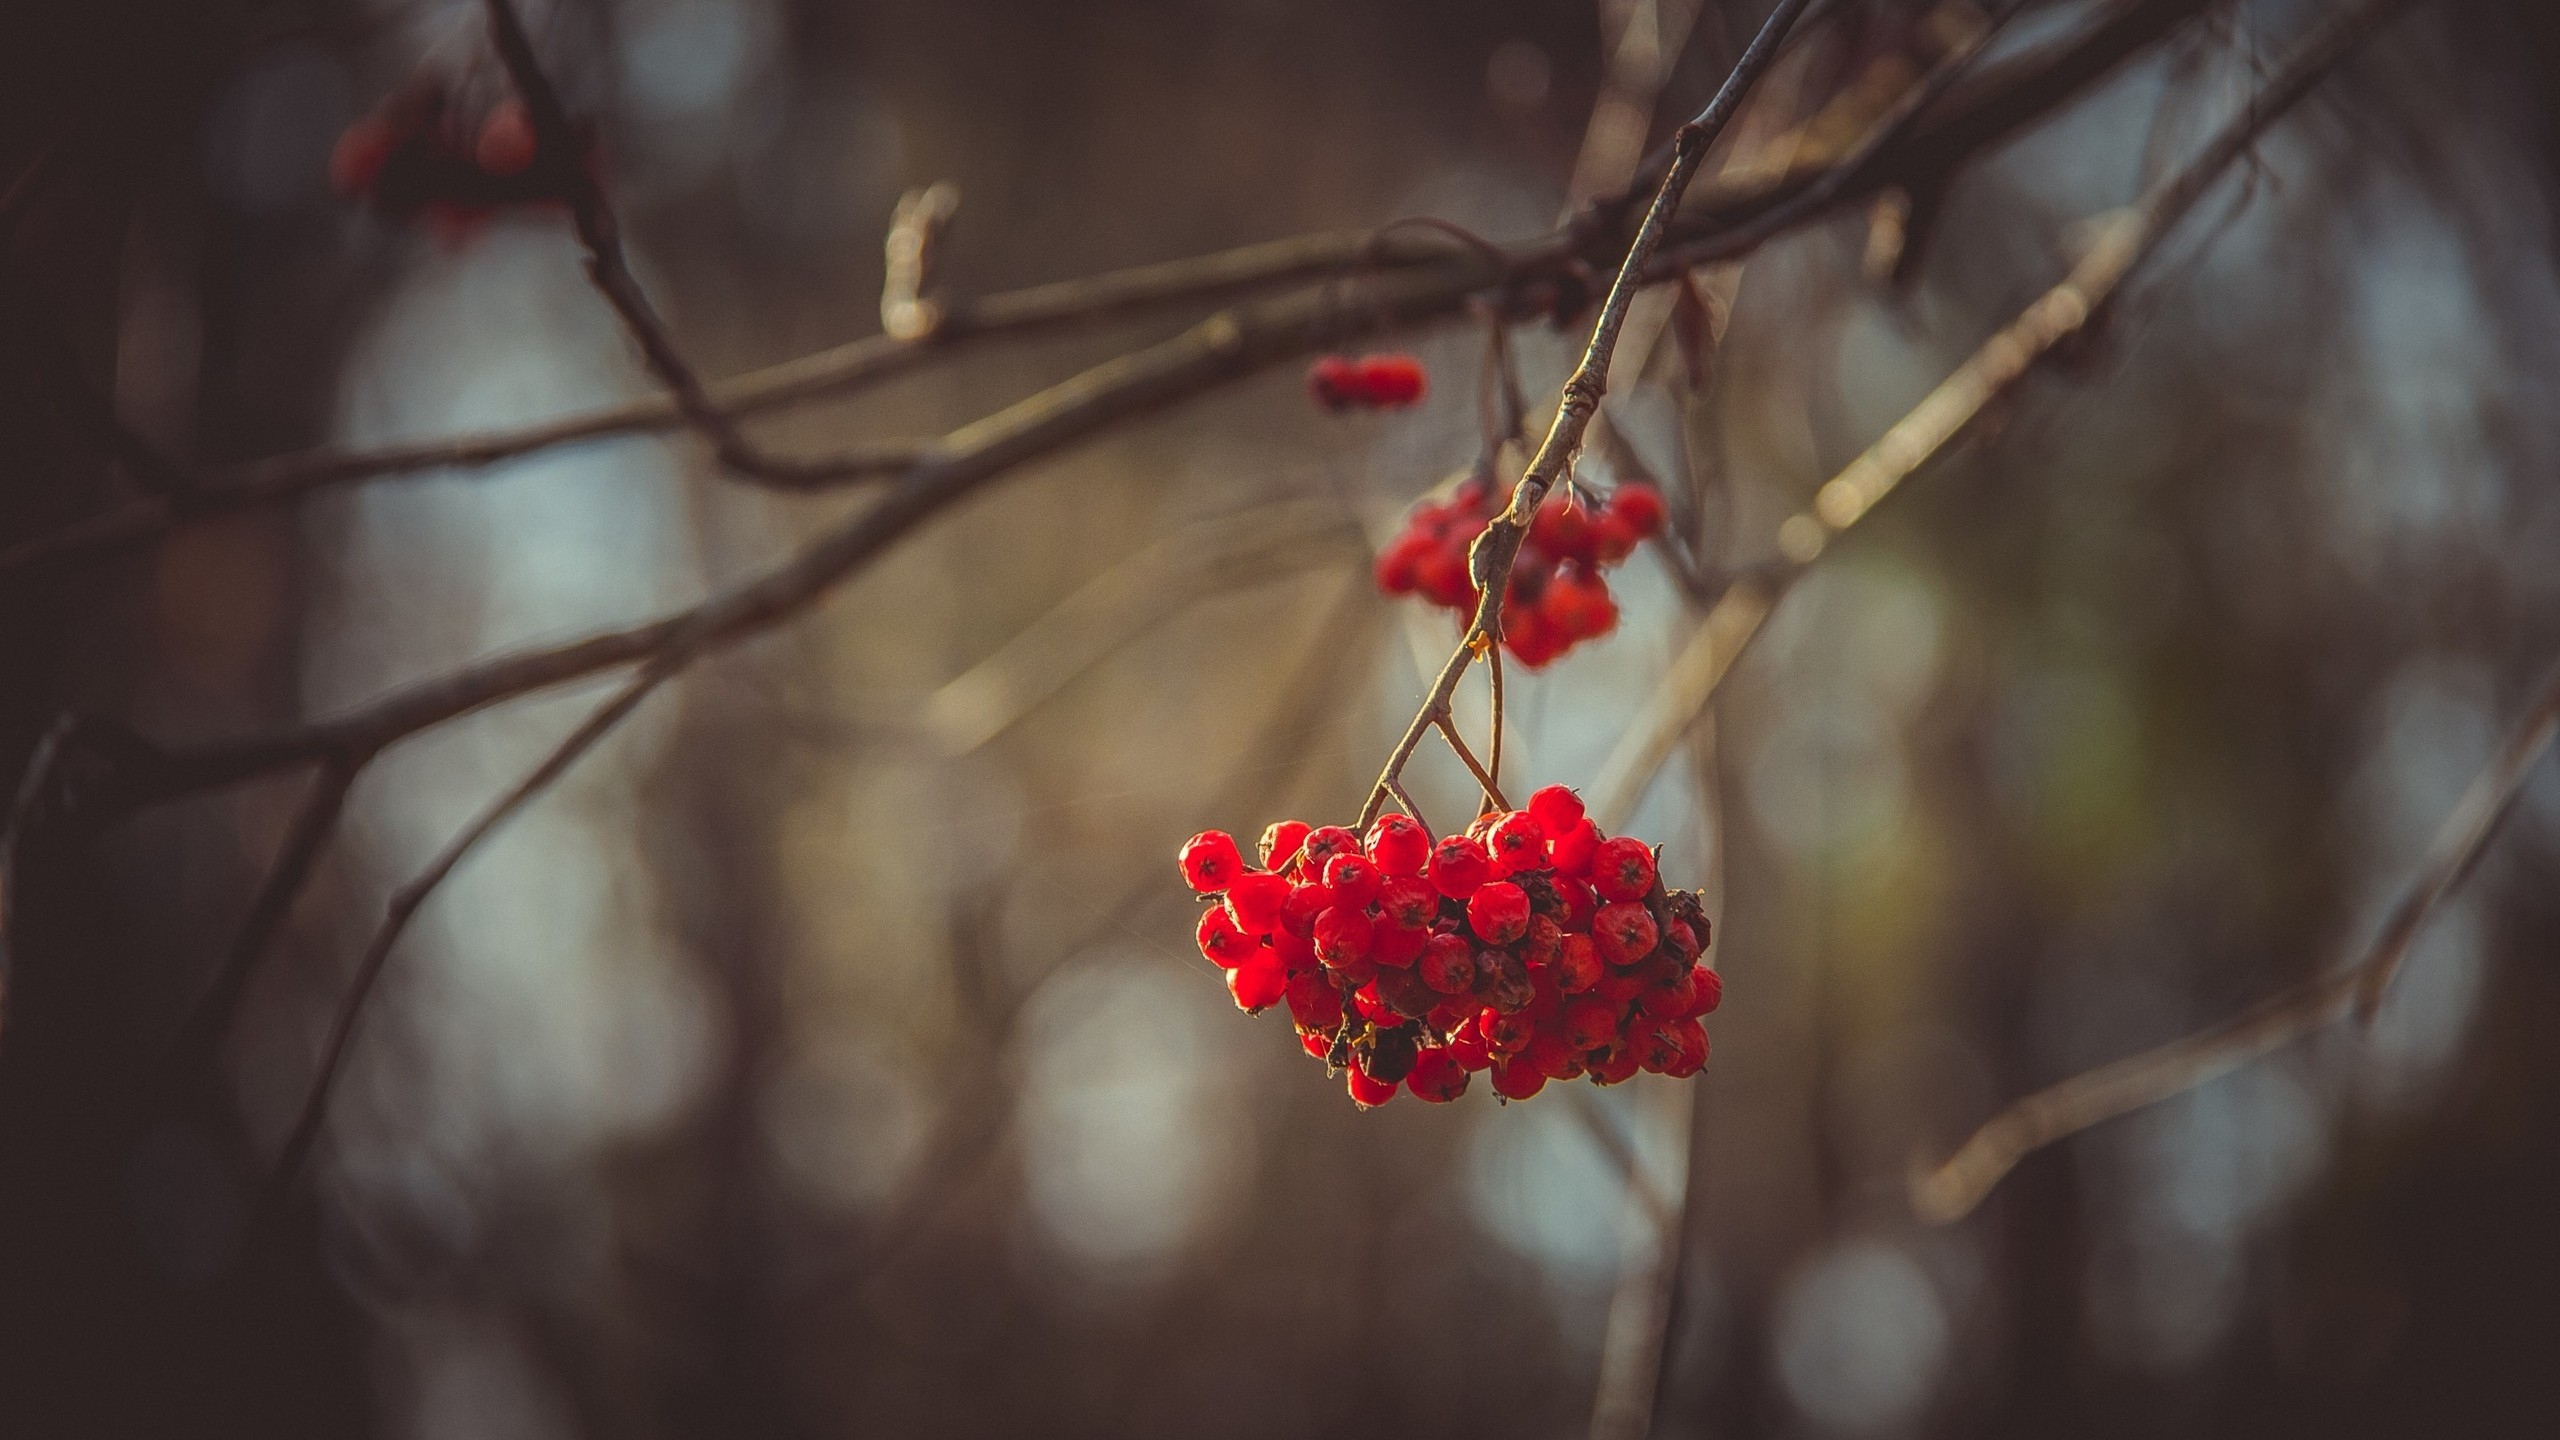 Mountain Ash Berries for 2560x1440 HDTV resolution